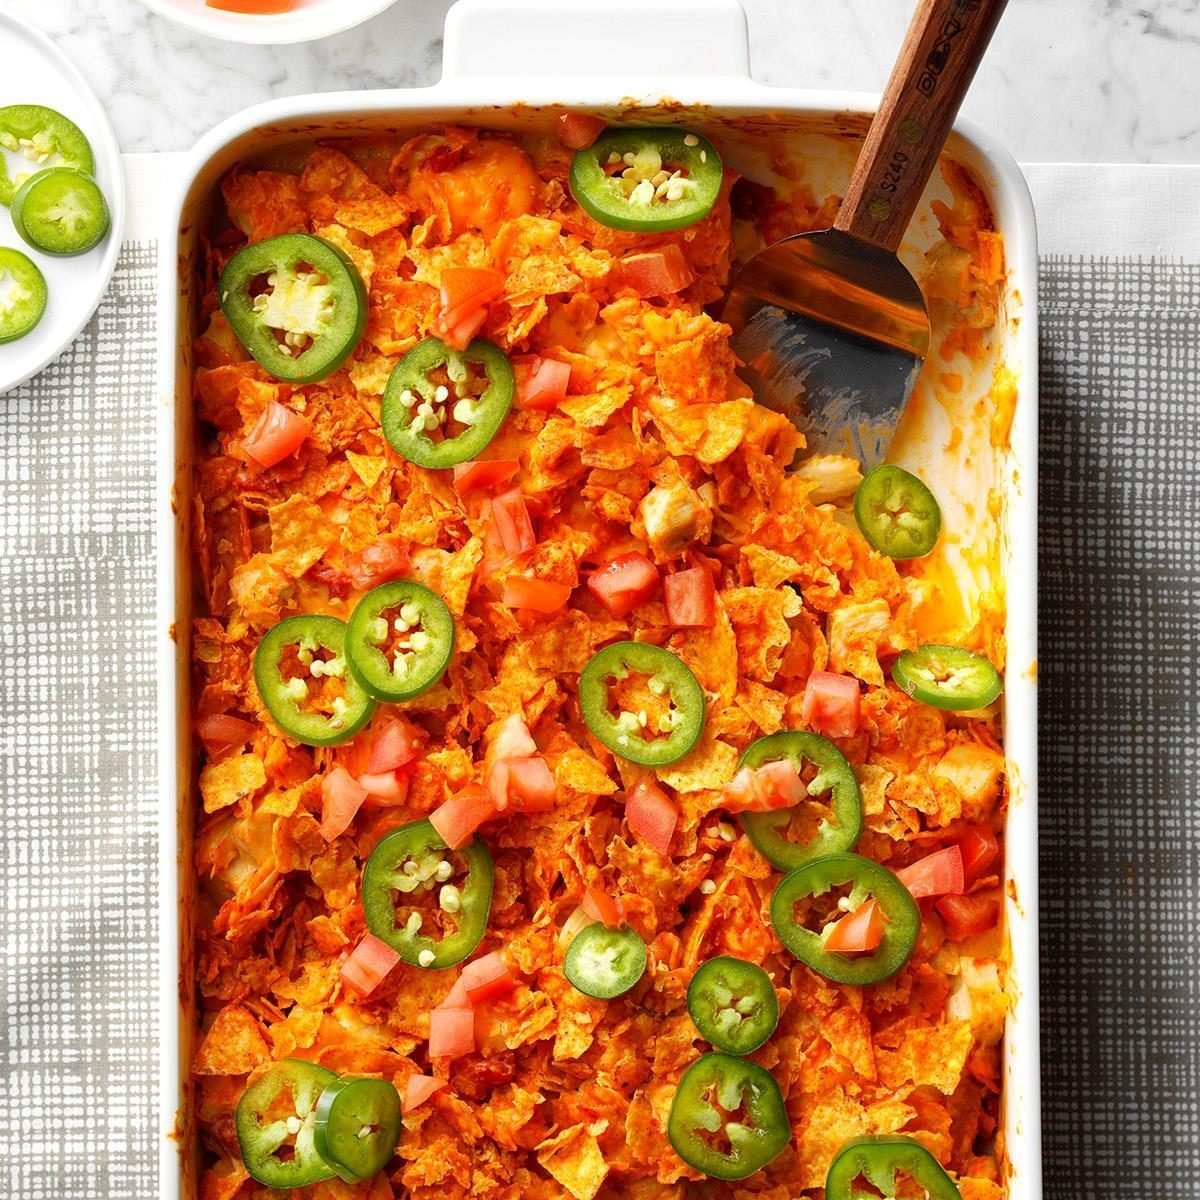 30 Recipes to Make With a Bag of Tortilla Chips